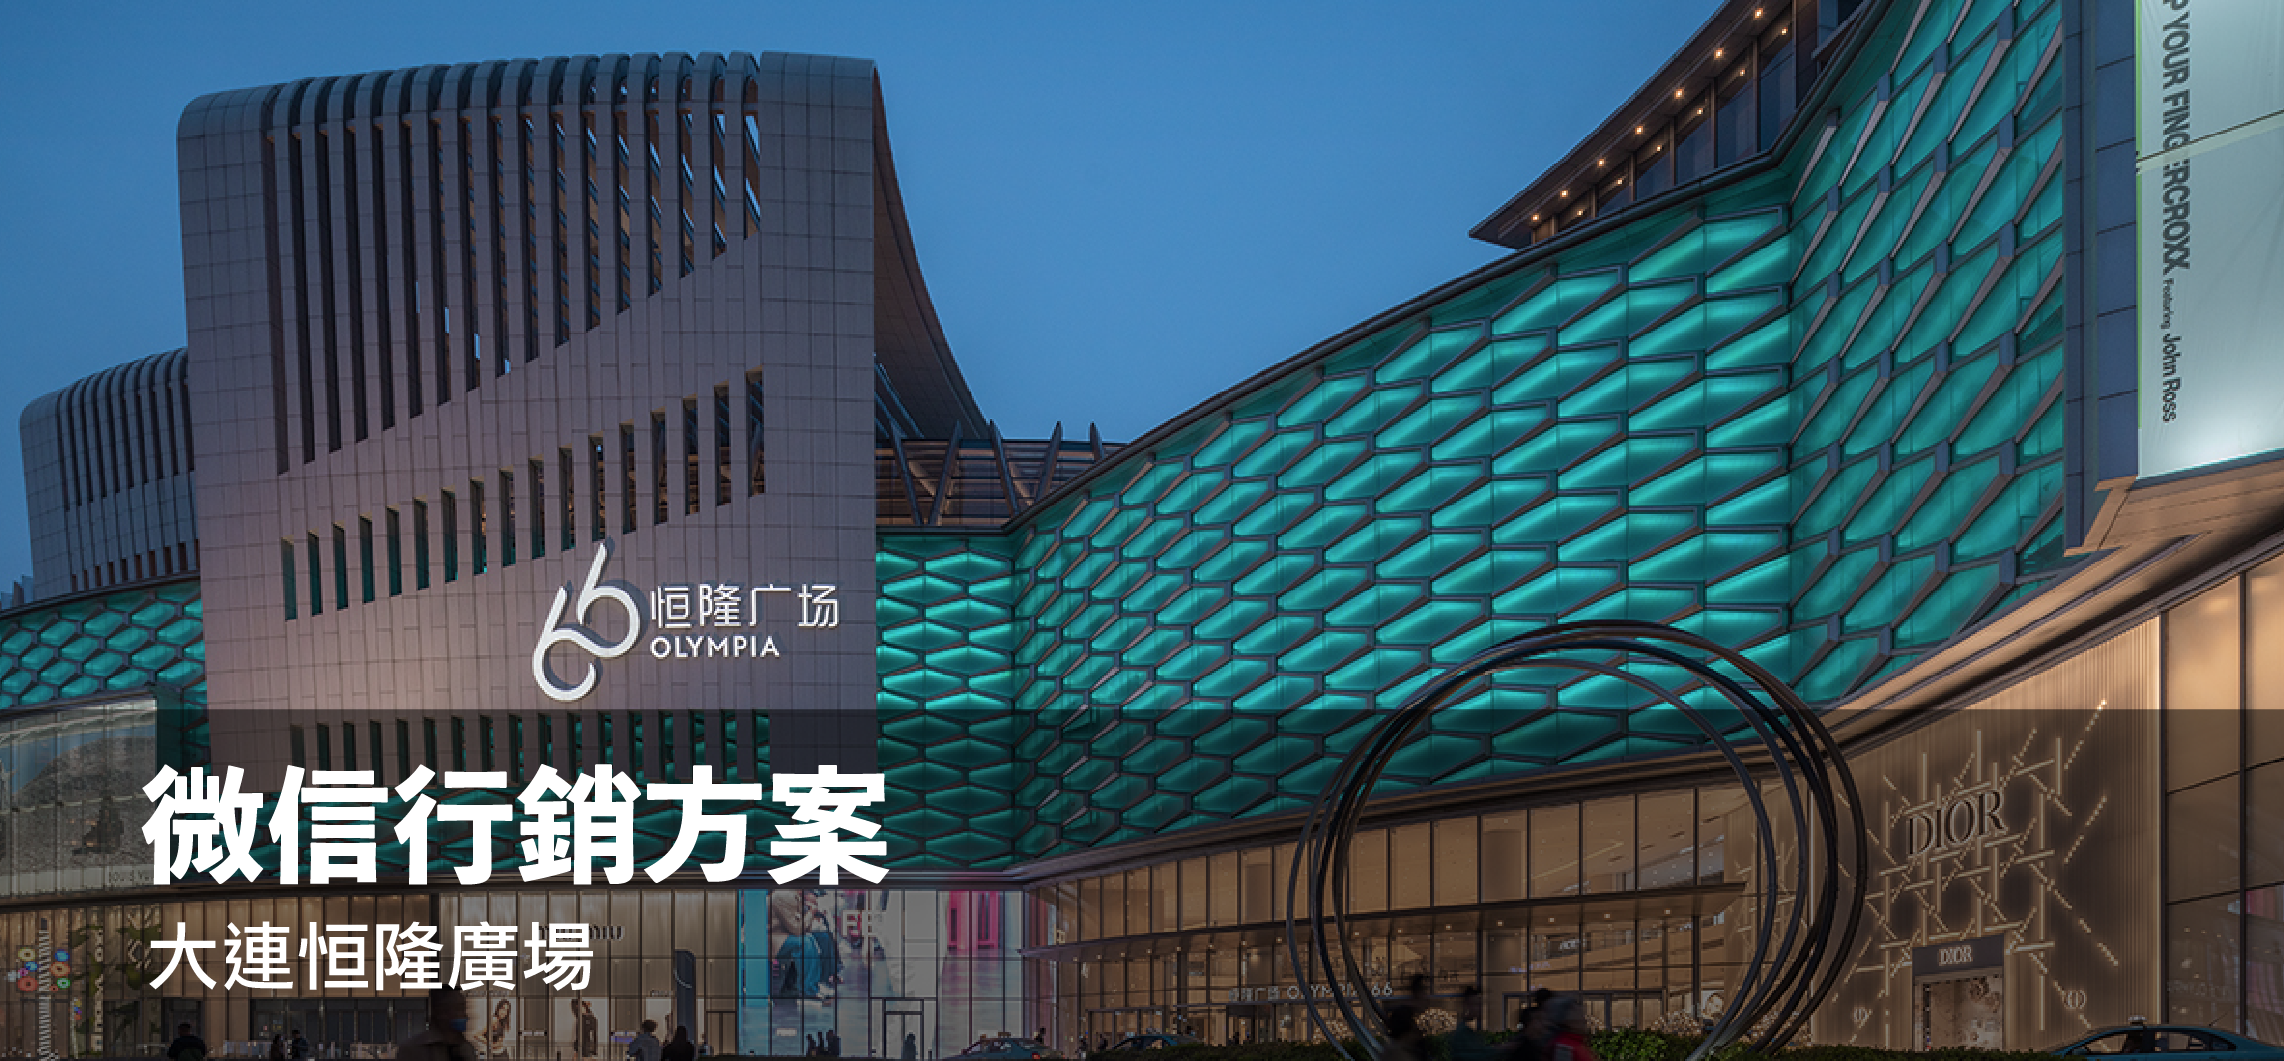 WeChat Solution - OLYMPIA 66 - Shopping Mall - INITSOC